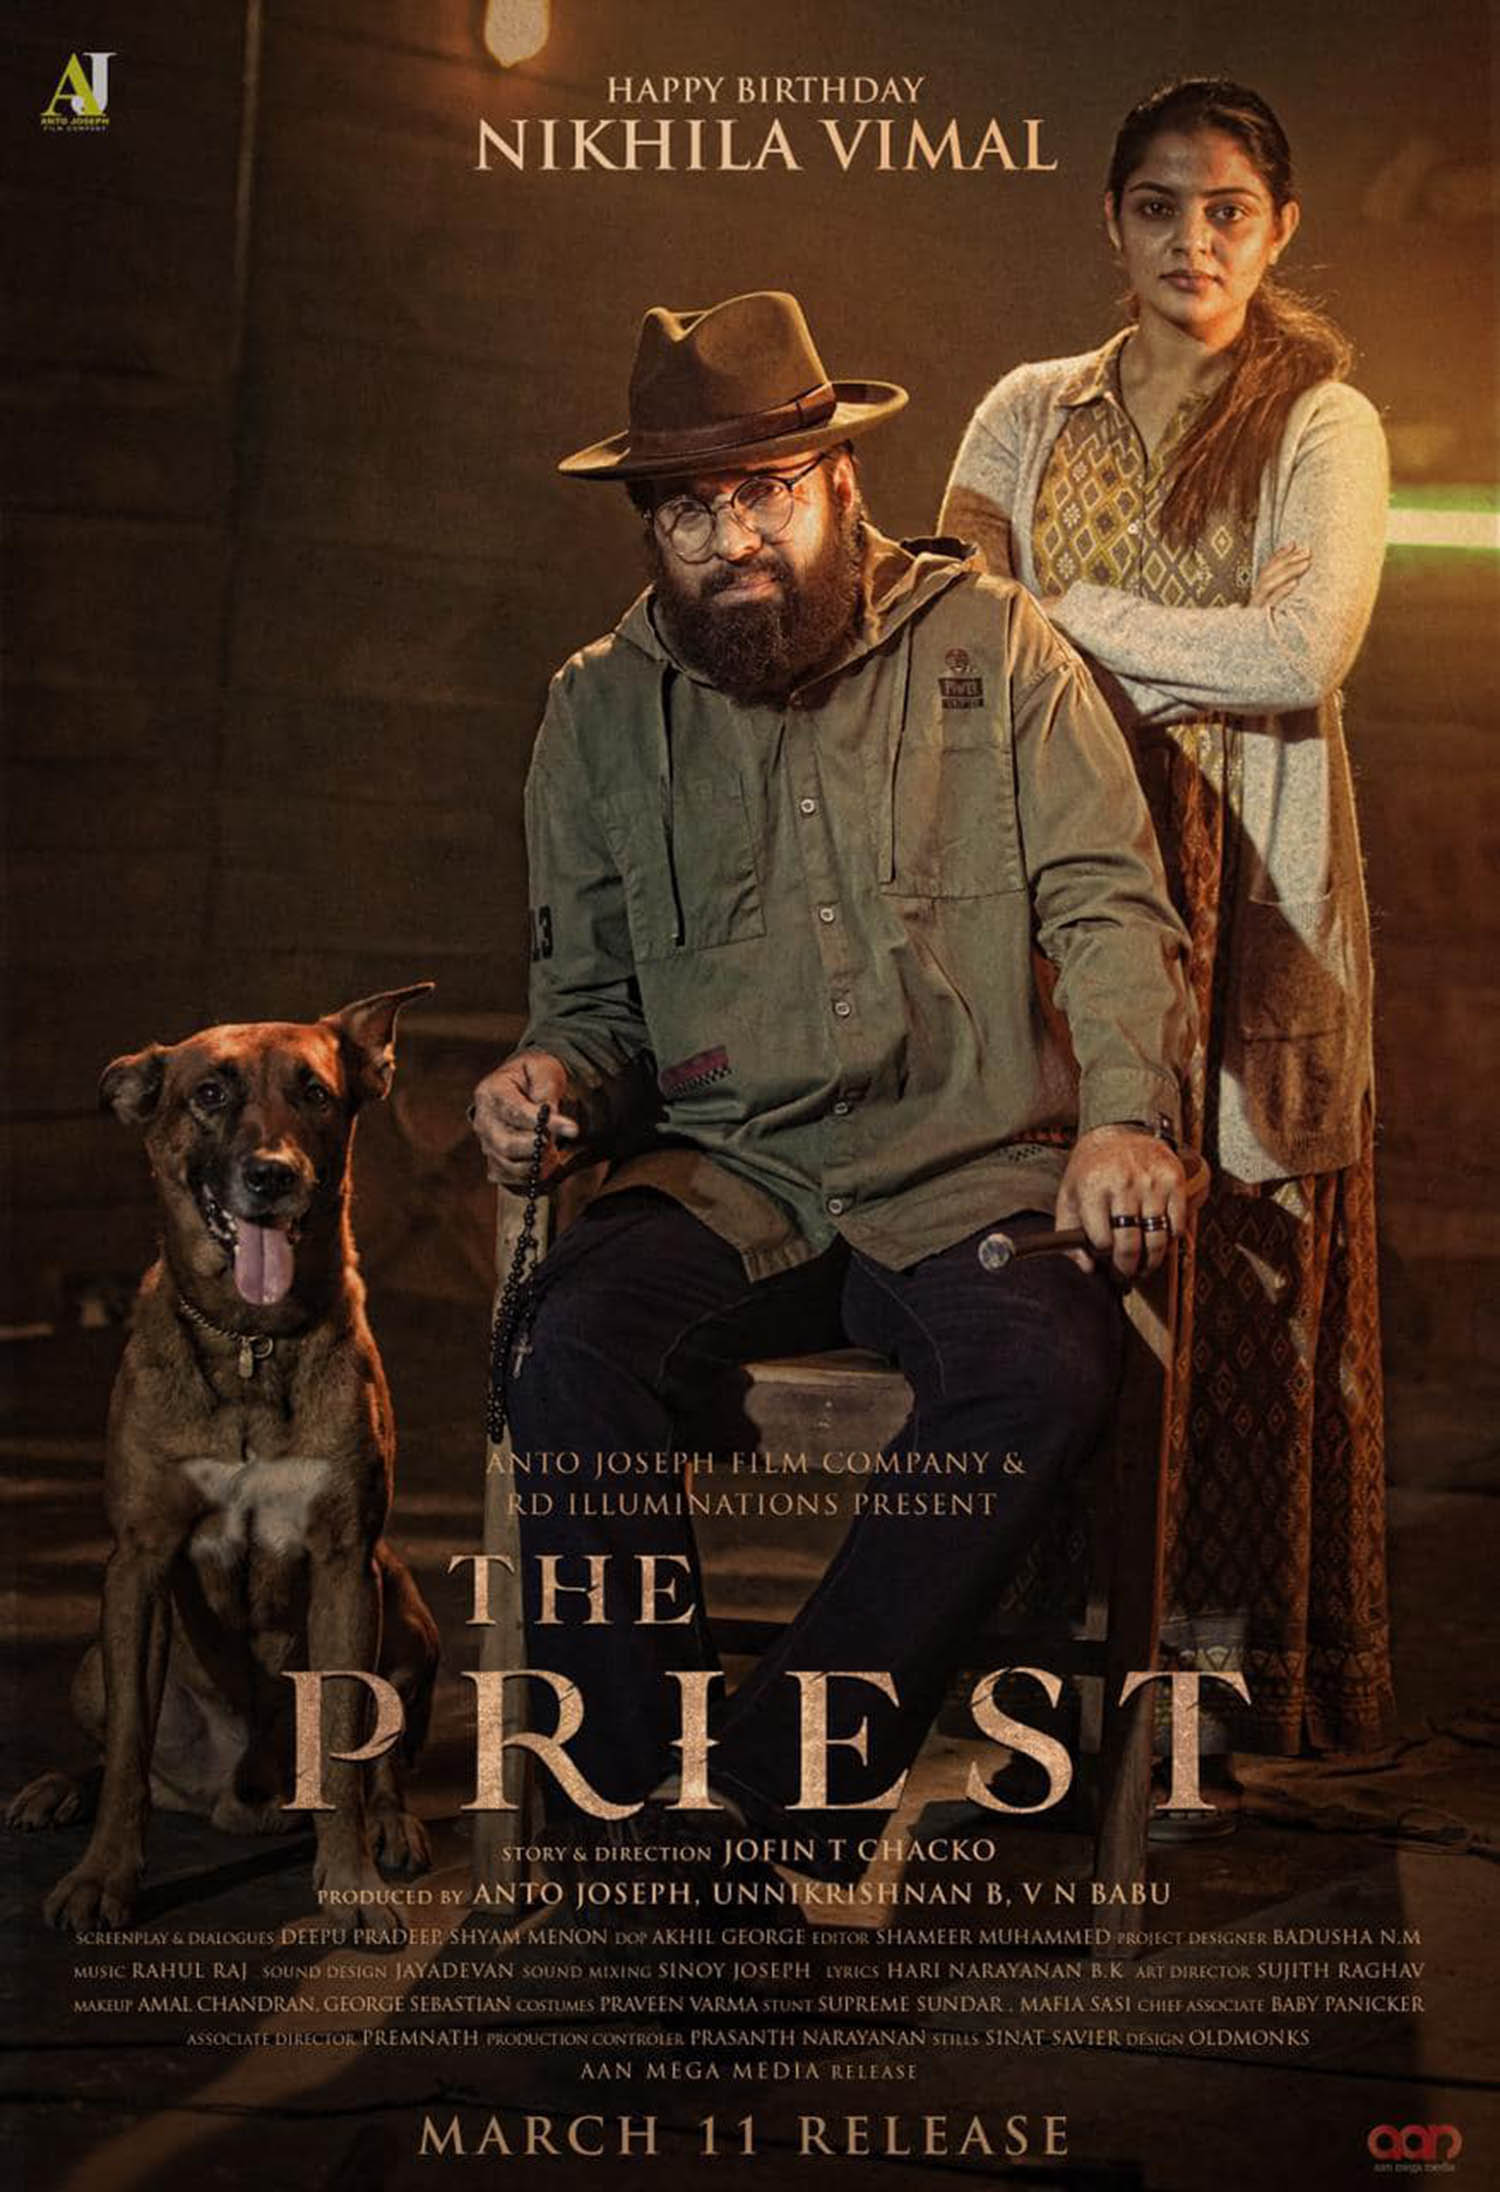 the priest review,the priest ratings,the priest hit or flop,mammootty,mammootty new movie,mammootty the priest review,manju warrier,manju warrier new film,latest malayalam cinema,manju warrier mammootty the priest latest reports,the priest malayalam movie review,the priest kerala box office reports